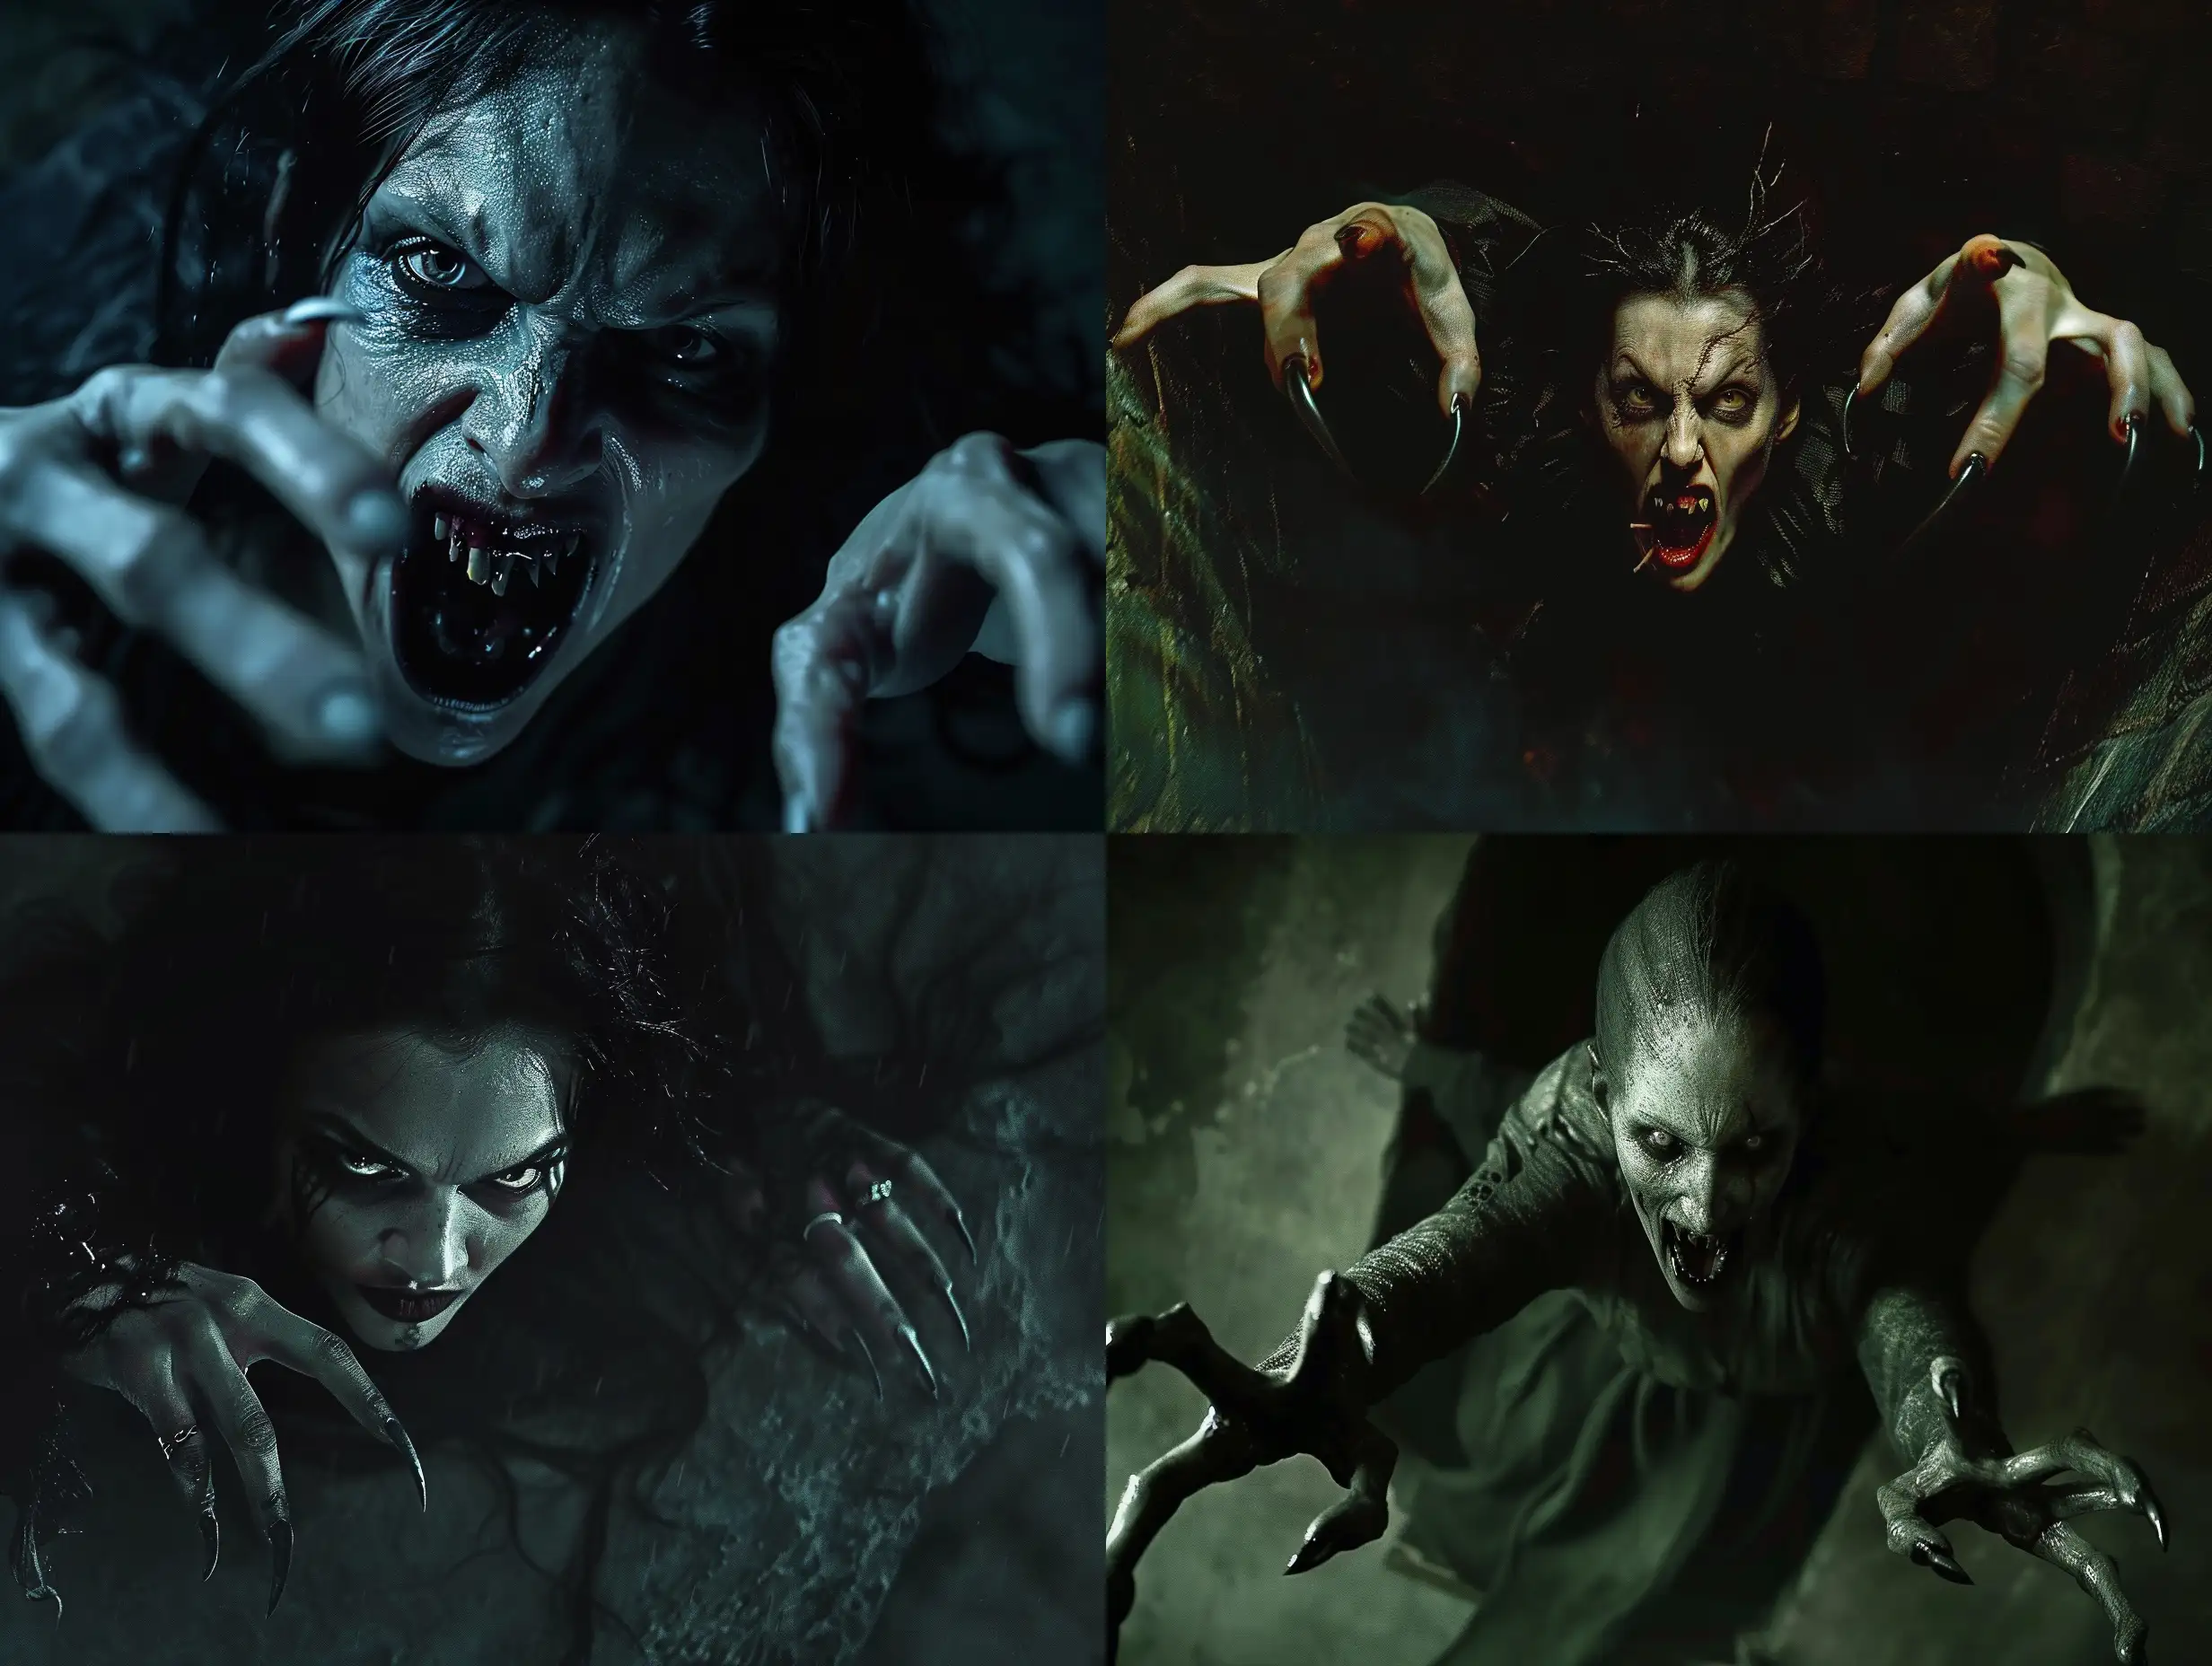 Monstrous-Vampire-Woman-Emerging-from-Darkness-with-Terrifying-Claws-and-Fangs